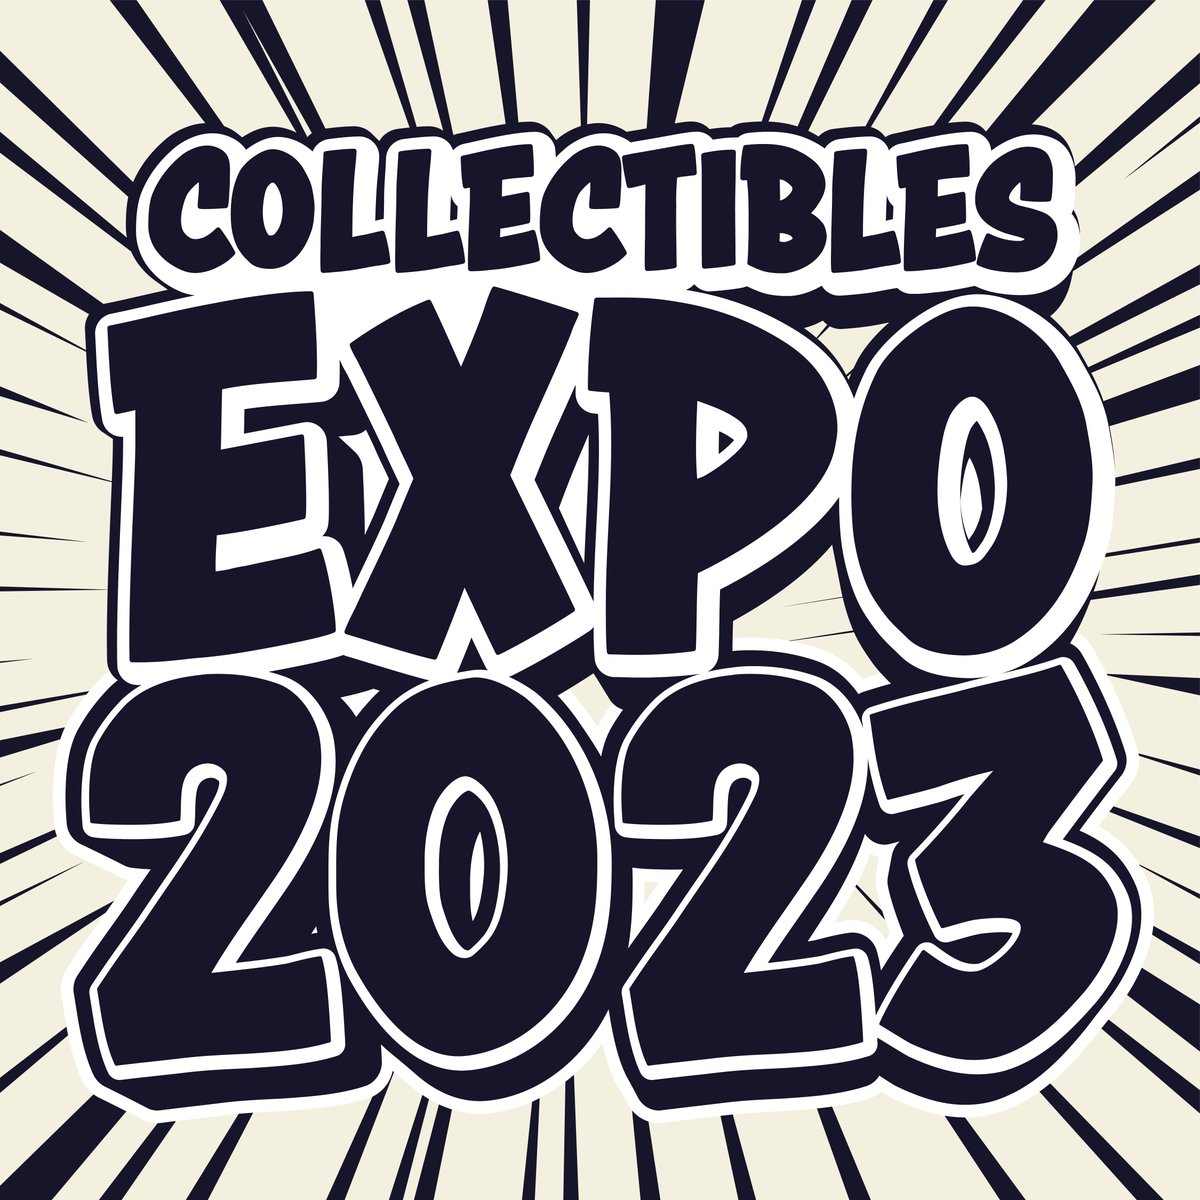 The July Collectibles chaos is coming to a screen near you!

Starting July 18th (PST) we’re celebrating the 2023 reveals season online with: 

• 5 days of deals
• Brand-new collectibles
• New License announcements
• Unveiling our 2023 Masters Collection.